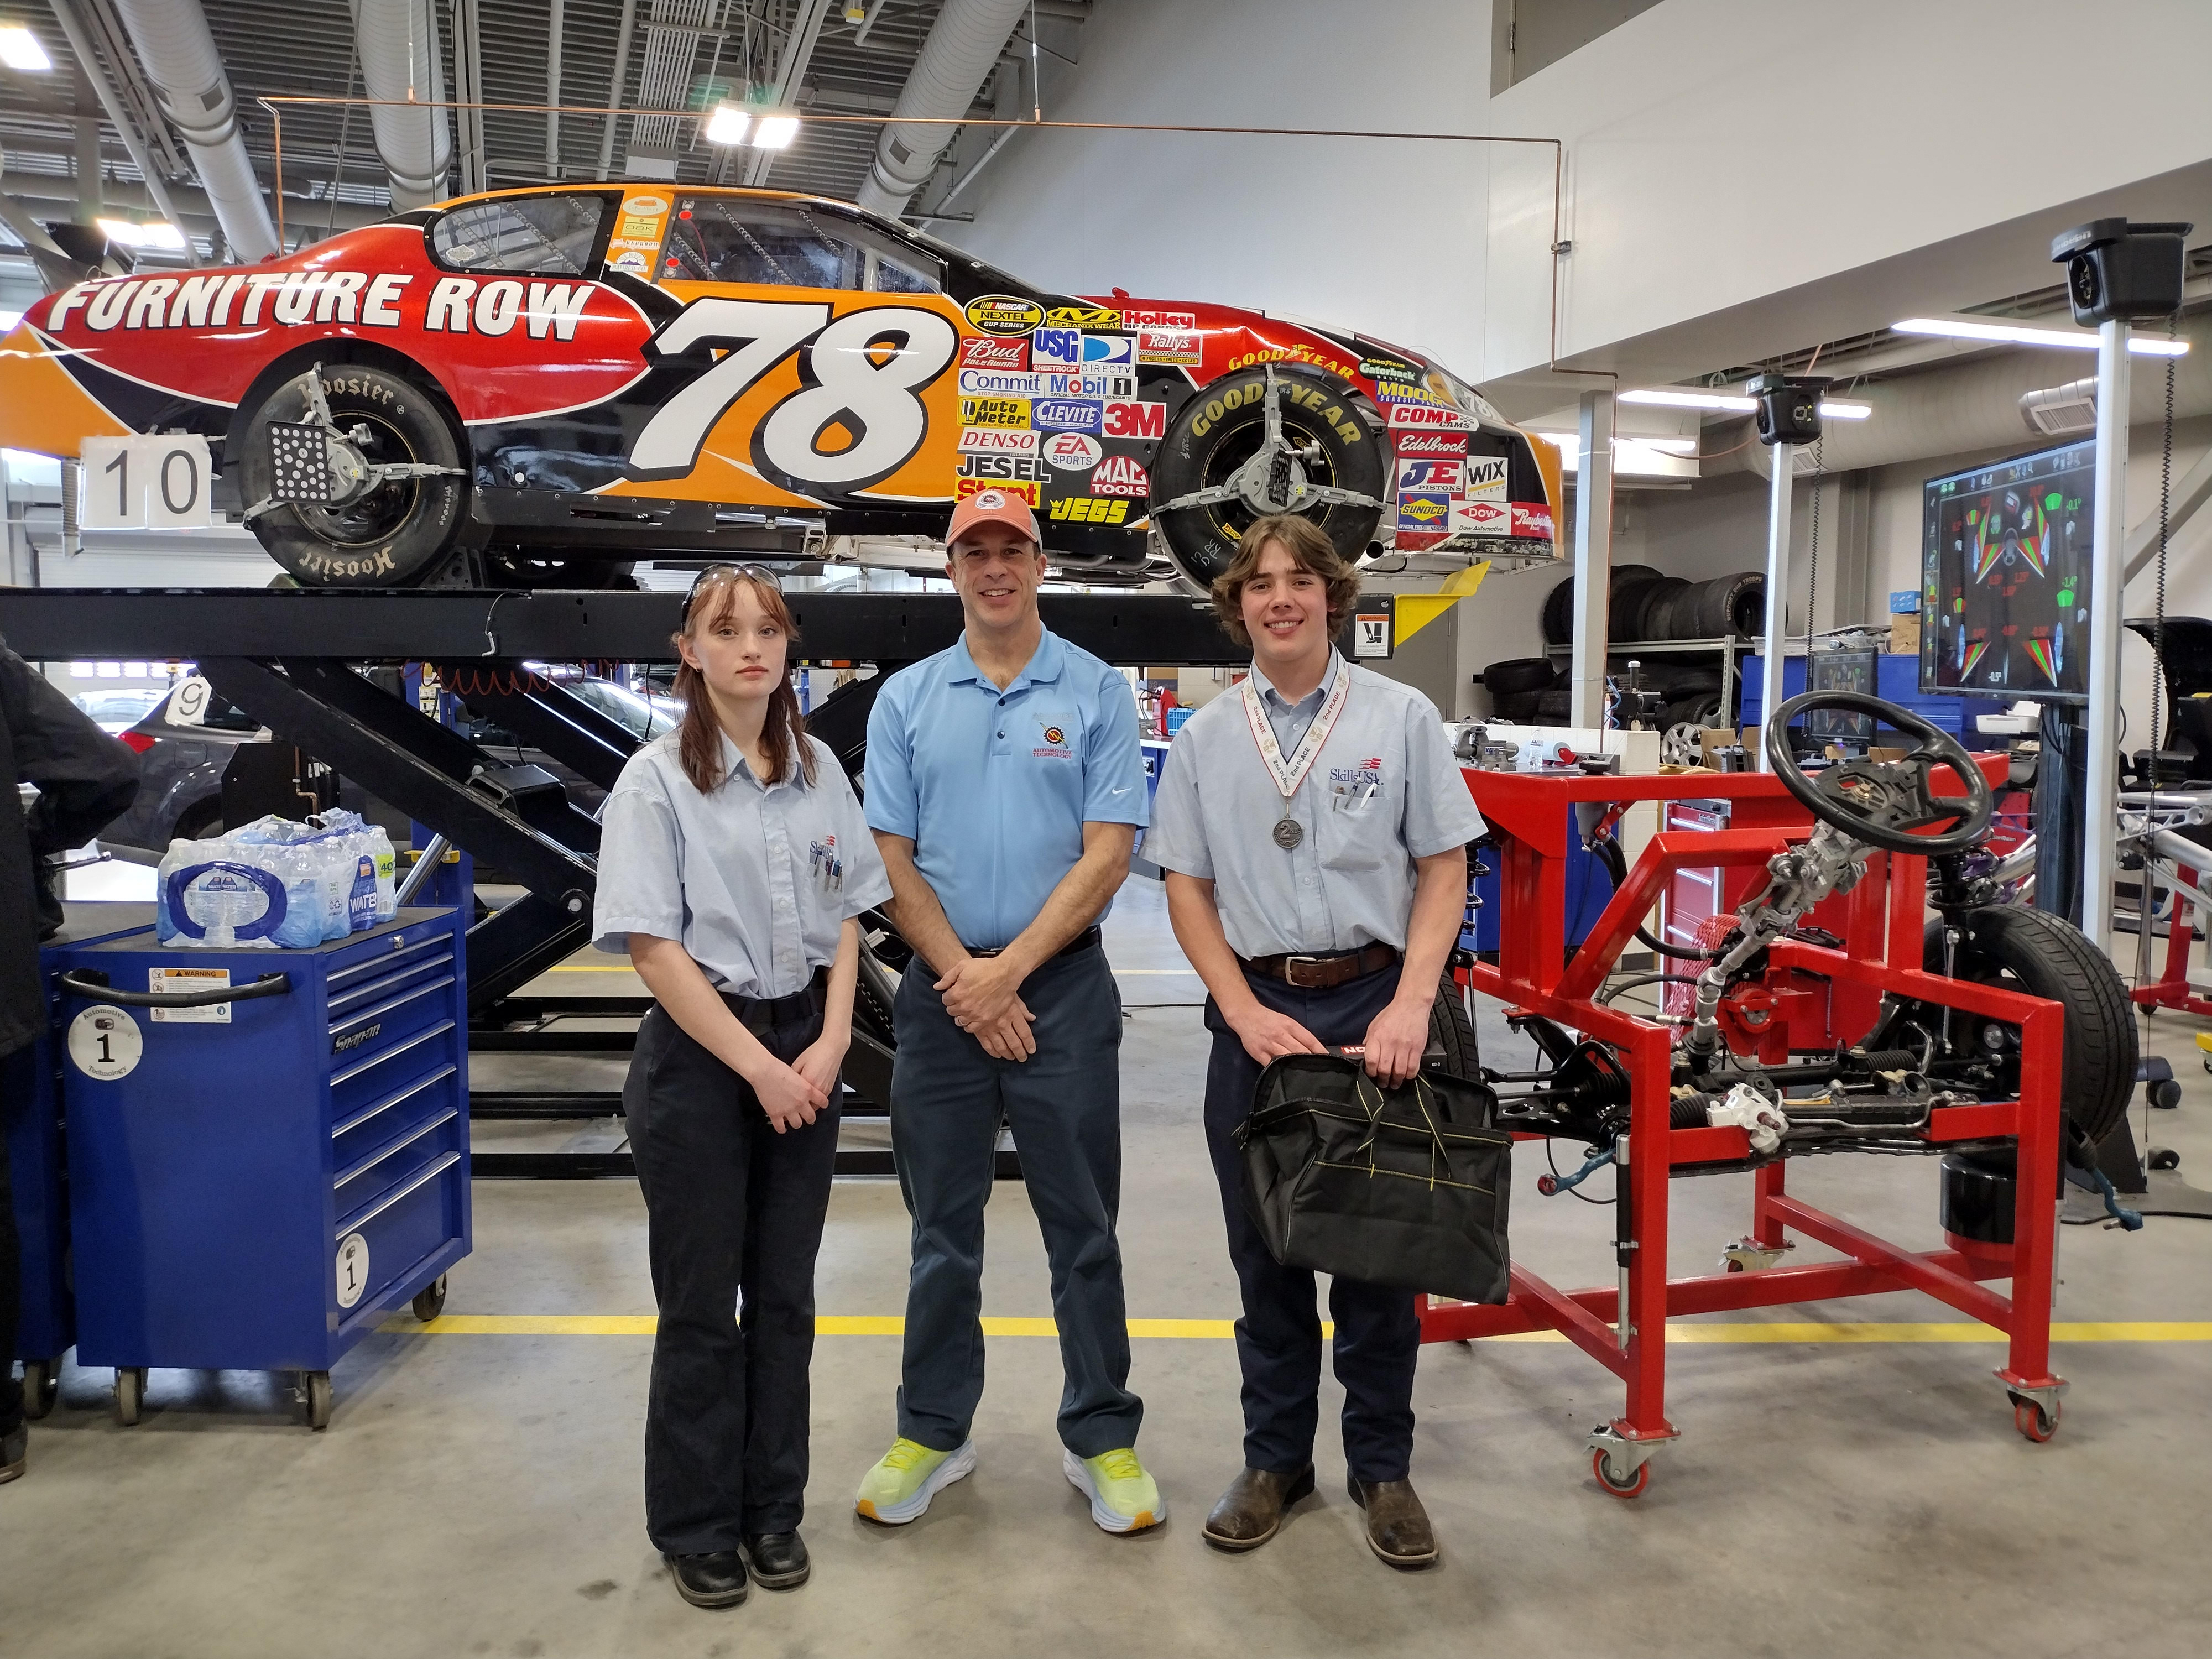 A female student, an instructor, and a male student wearing auto shop clothing stand in front of an elevated car with "Furniture Row" and number 78 on it.